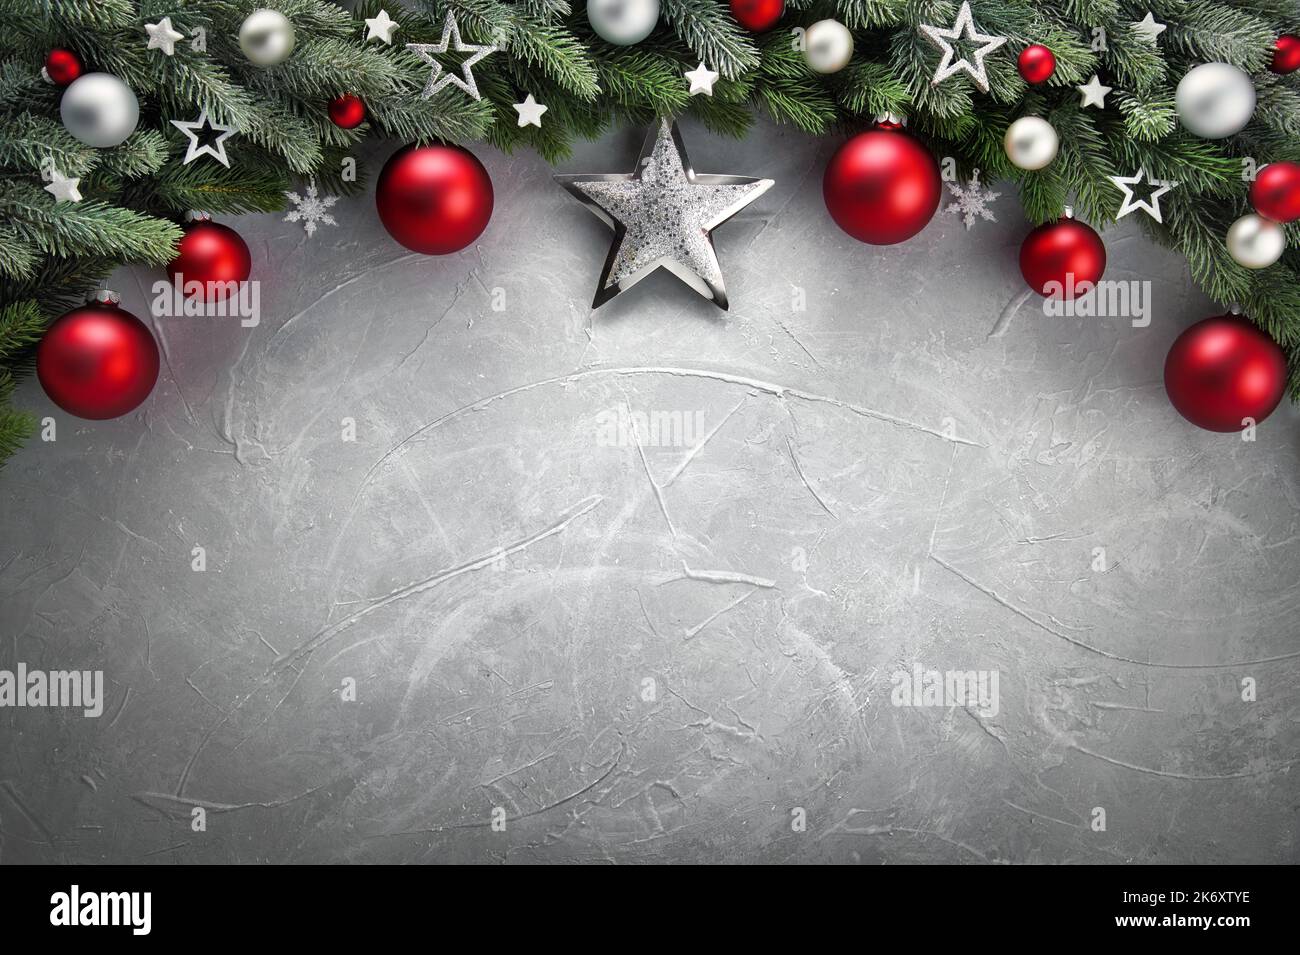 Elegant modern Christmas background with an arch-shaped border composed of fir branches, red and silver baubles and stars, on gray textured surface as Stock Photo